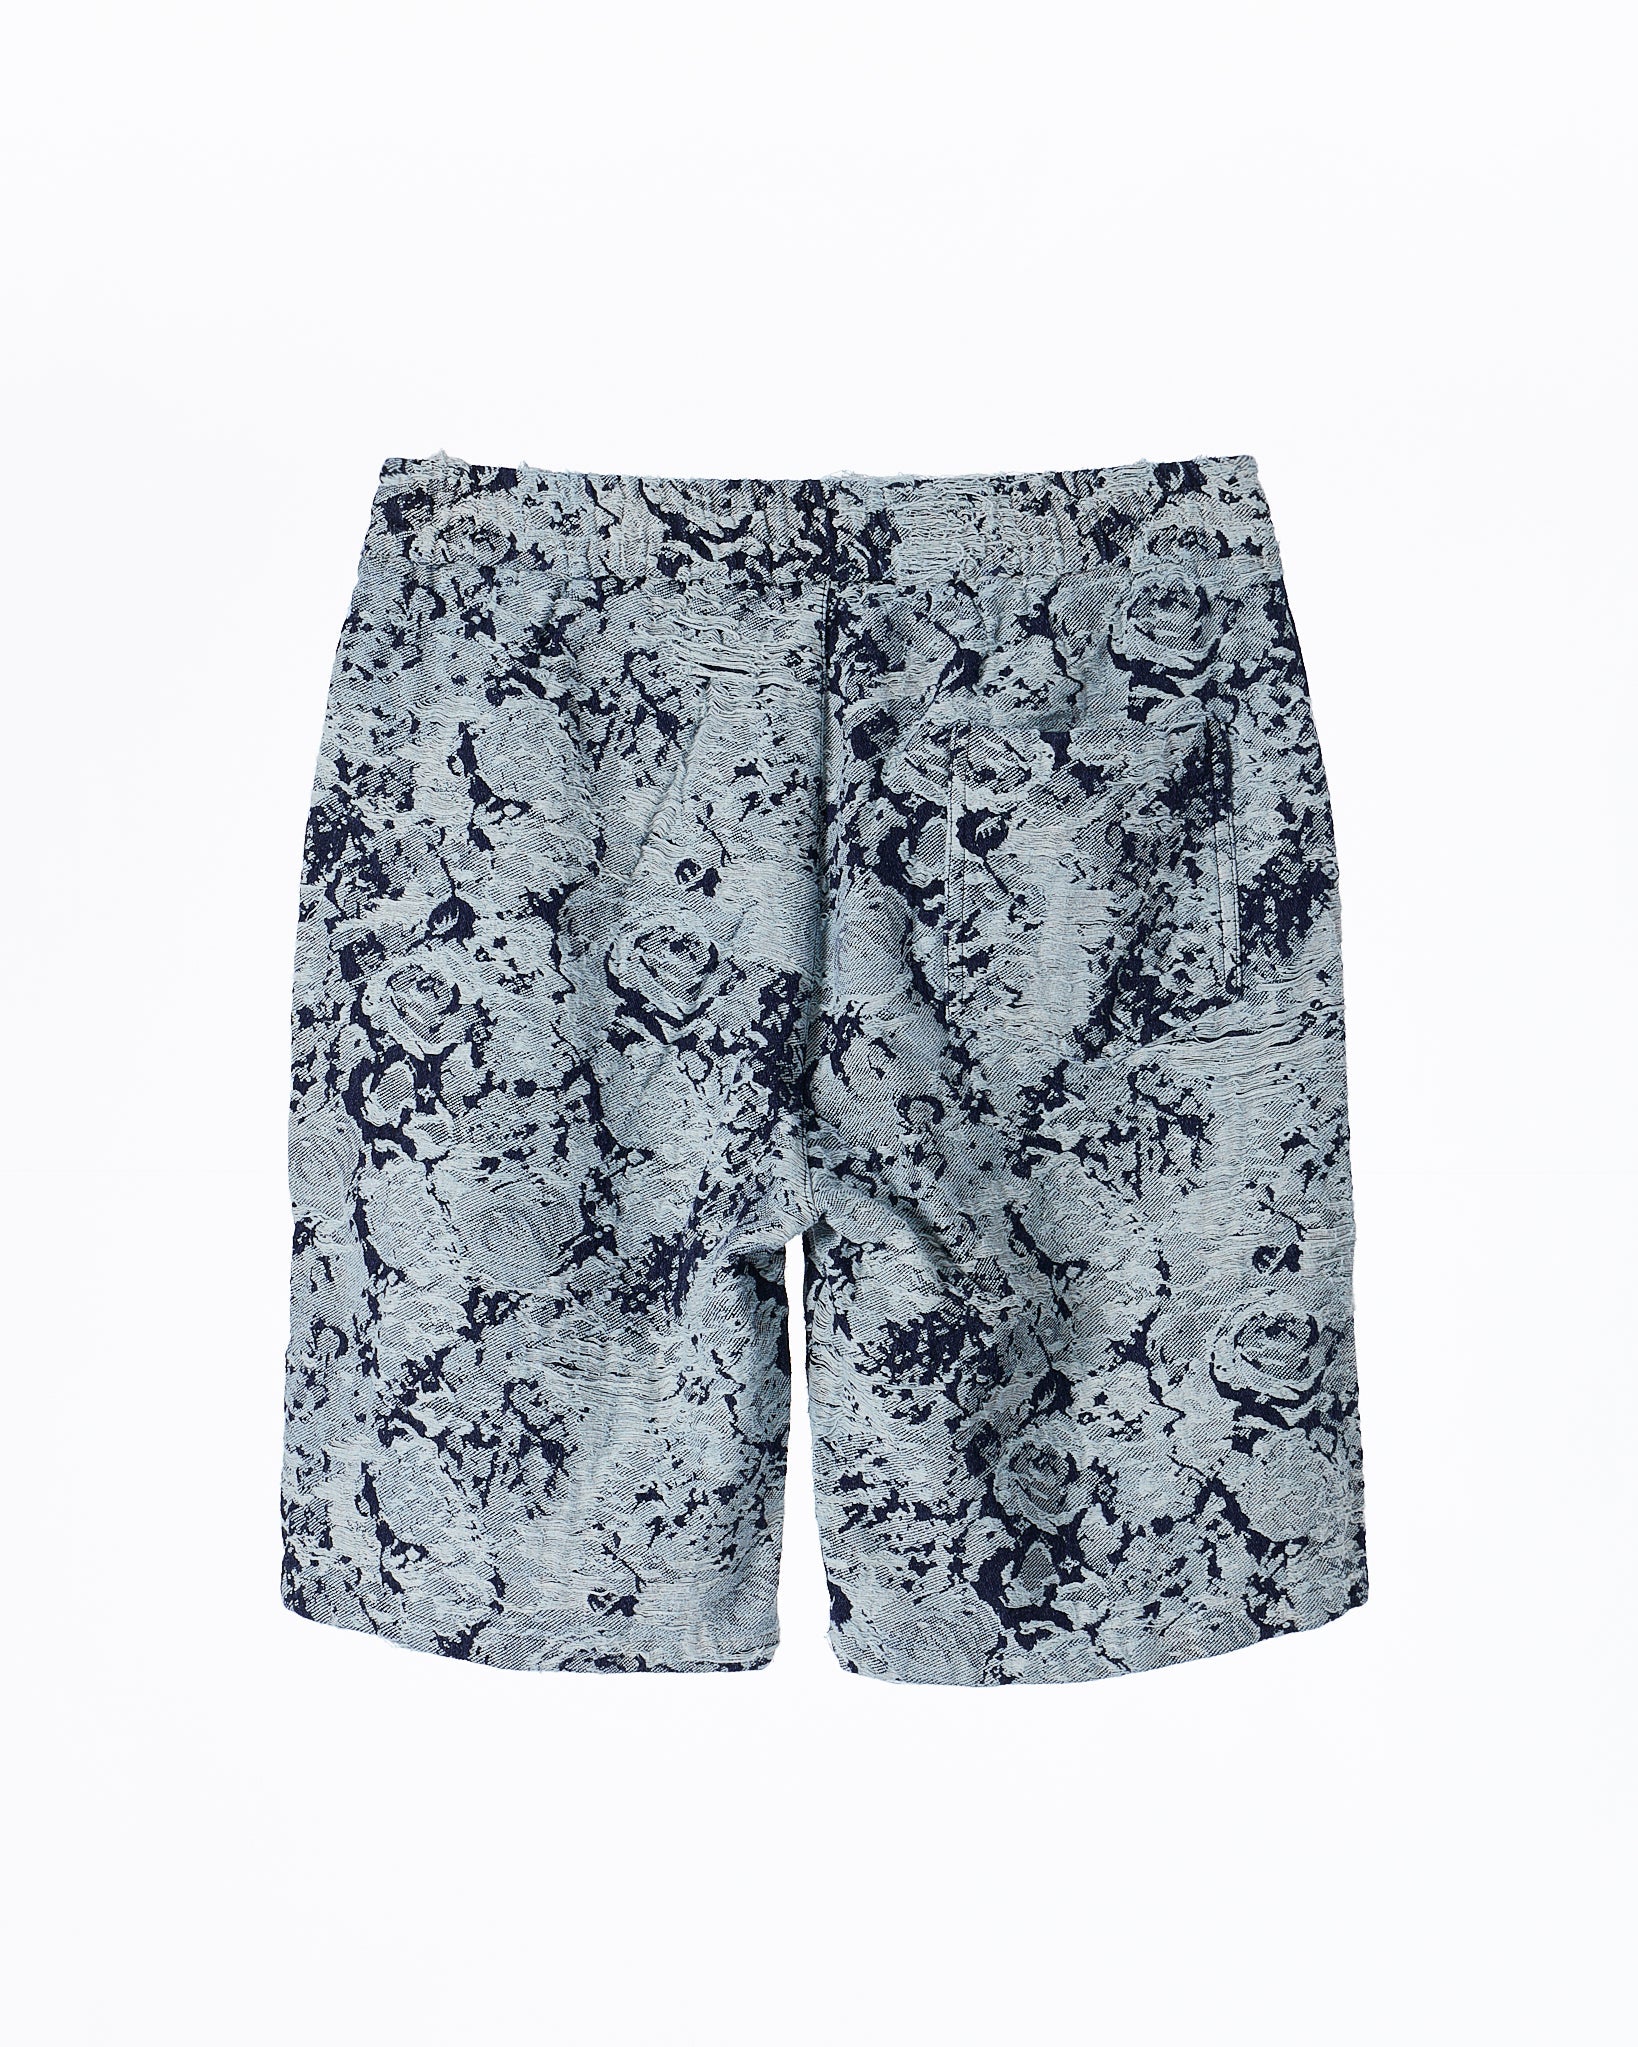 MOI OUTFIT-LV Floral Embossed Men Shorts 62.90